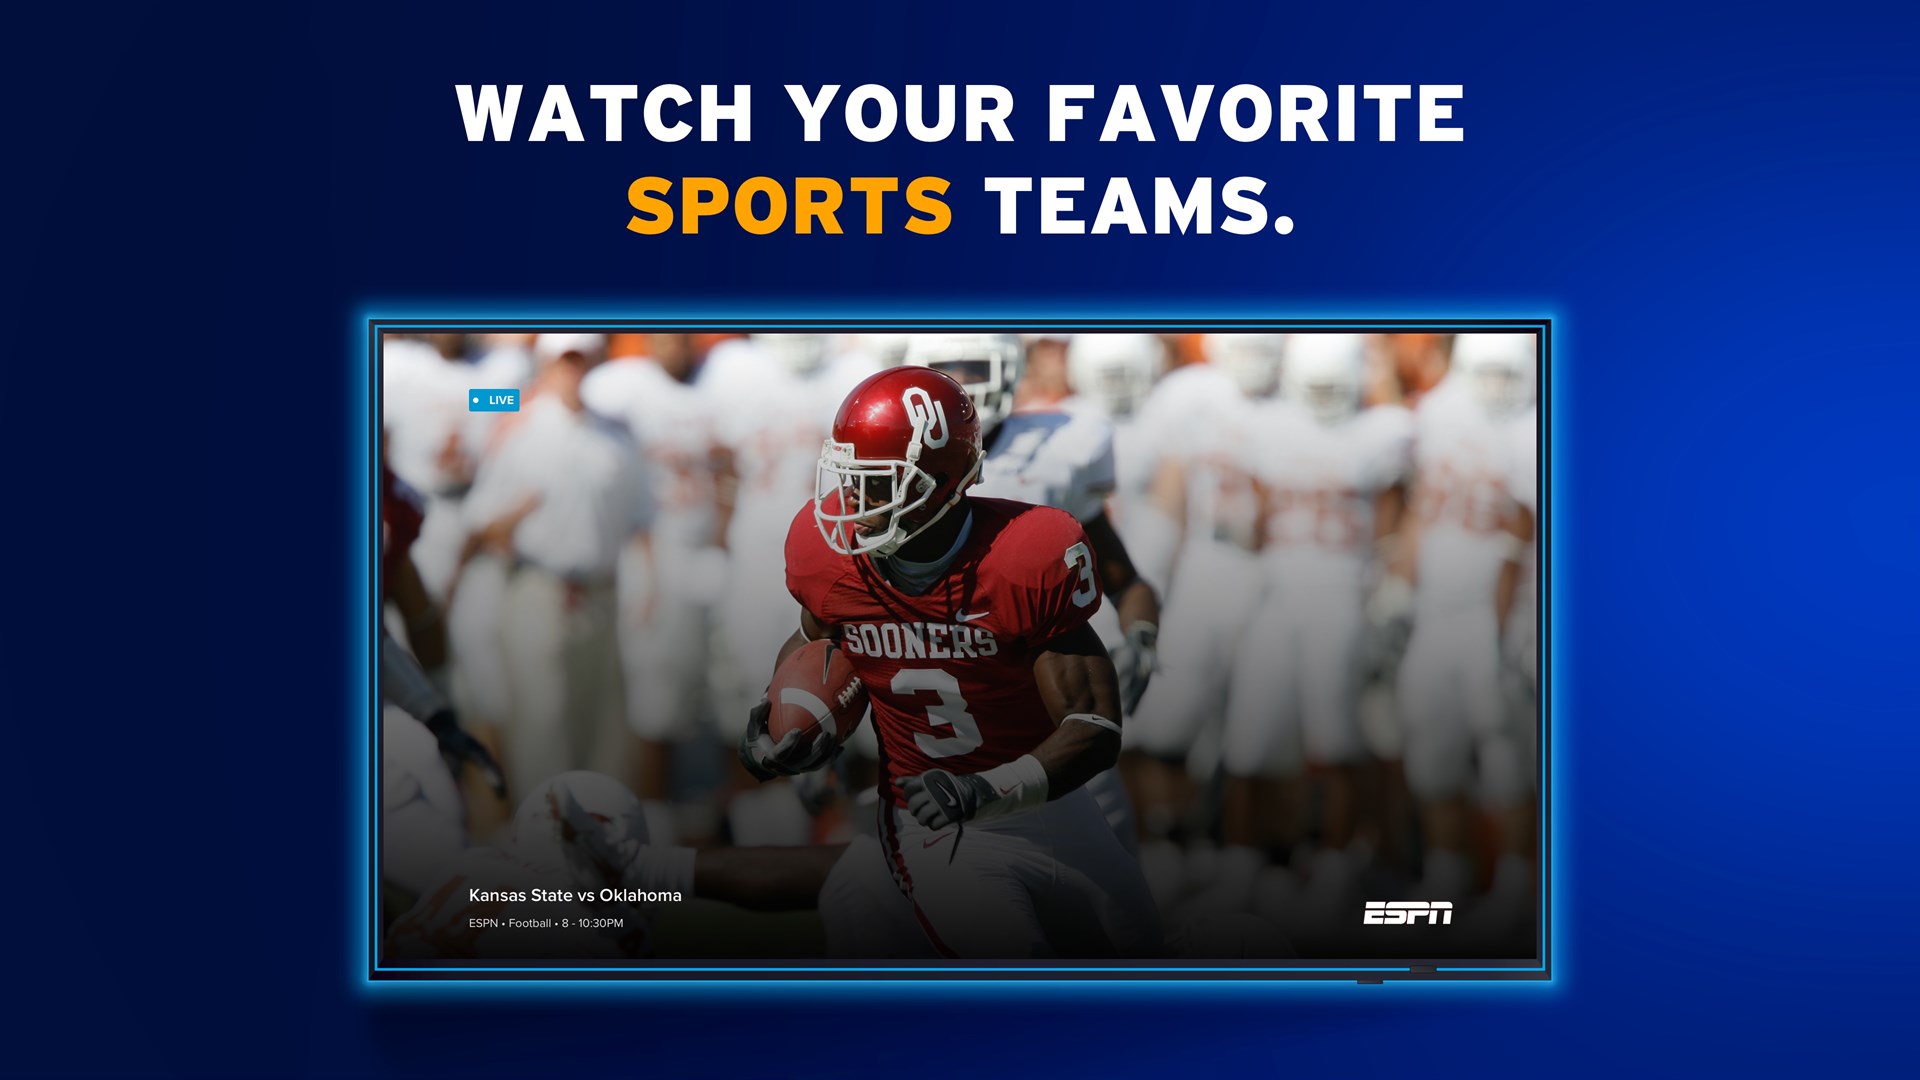 How to Watch NFL Games on Sling TV